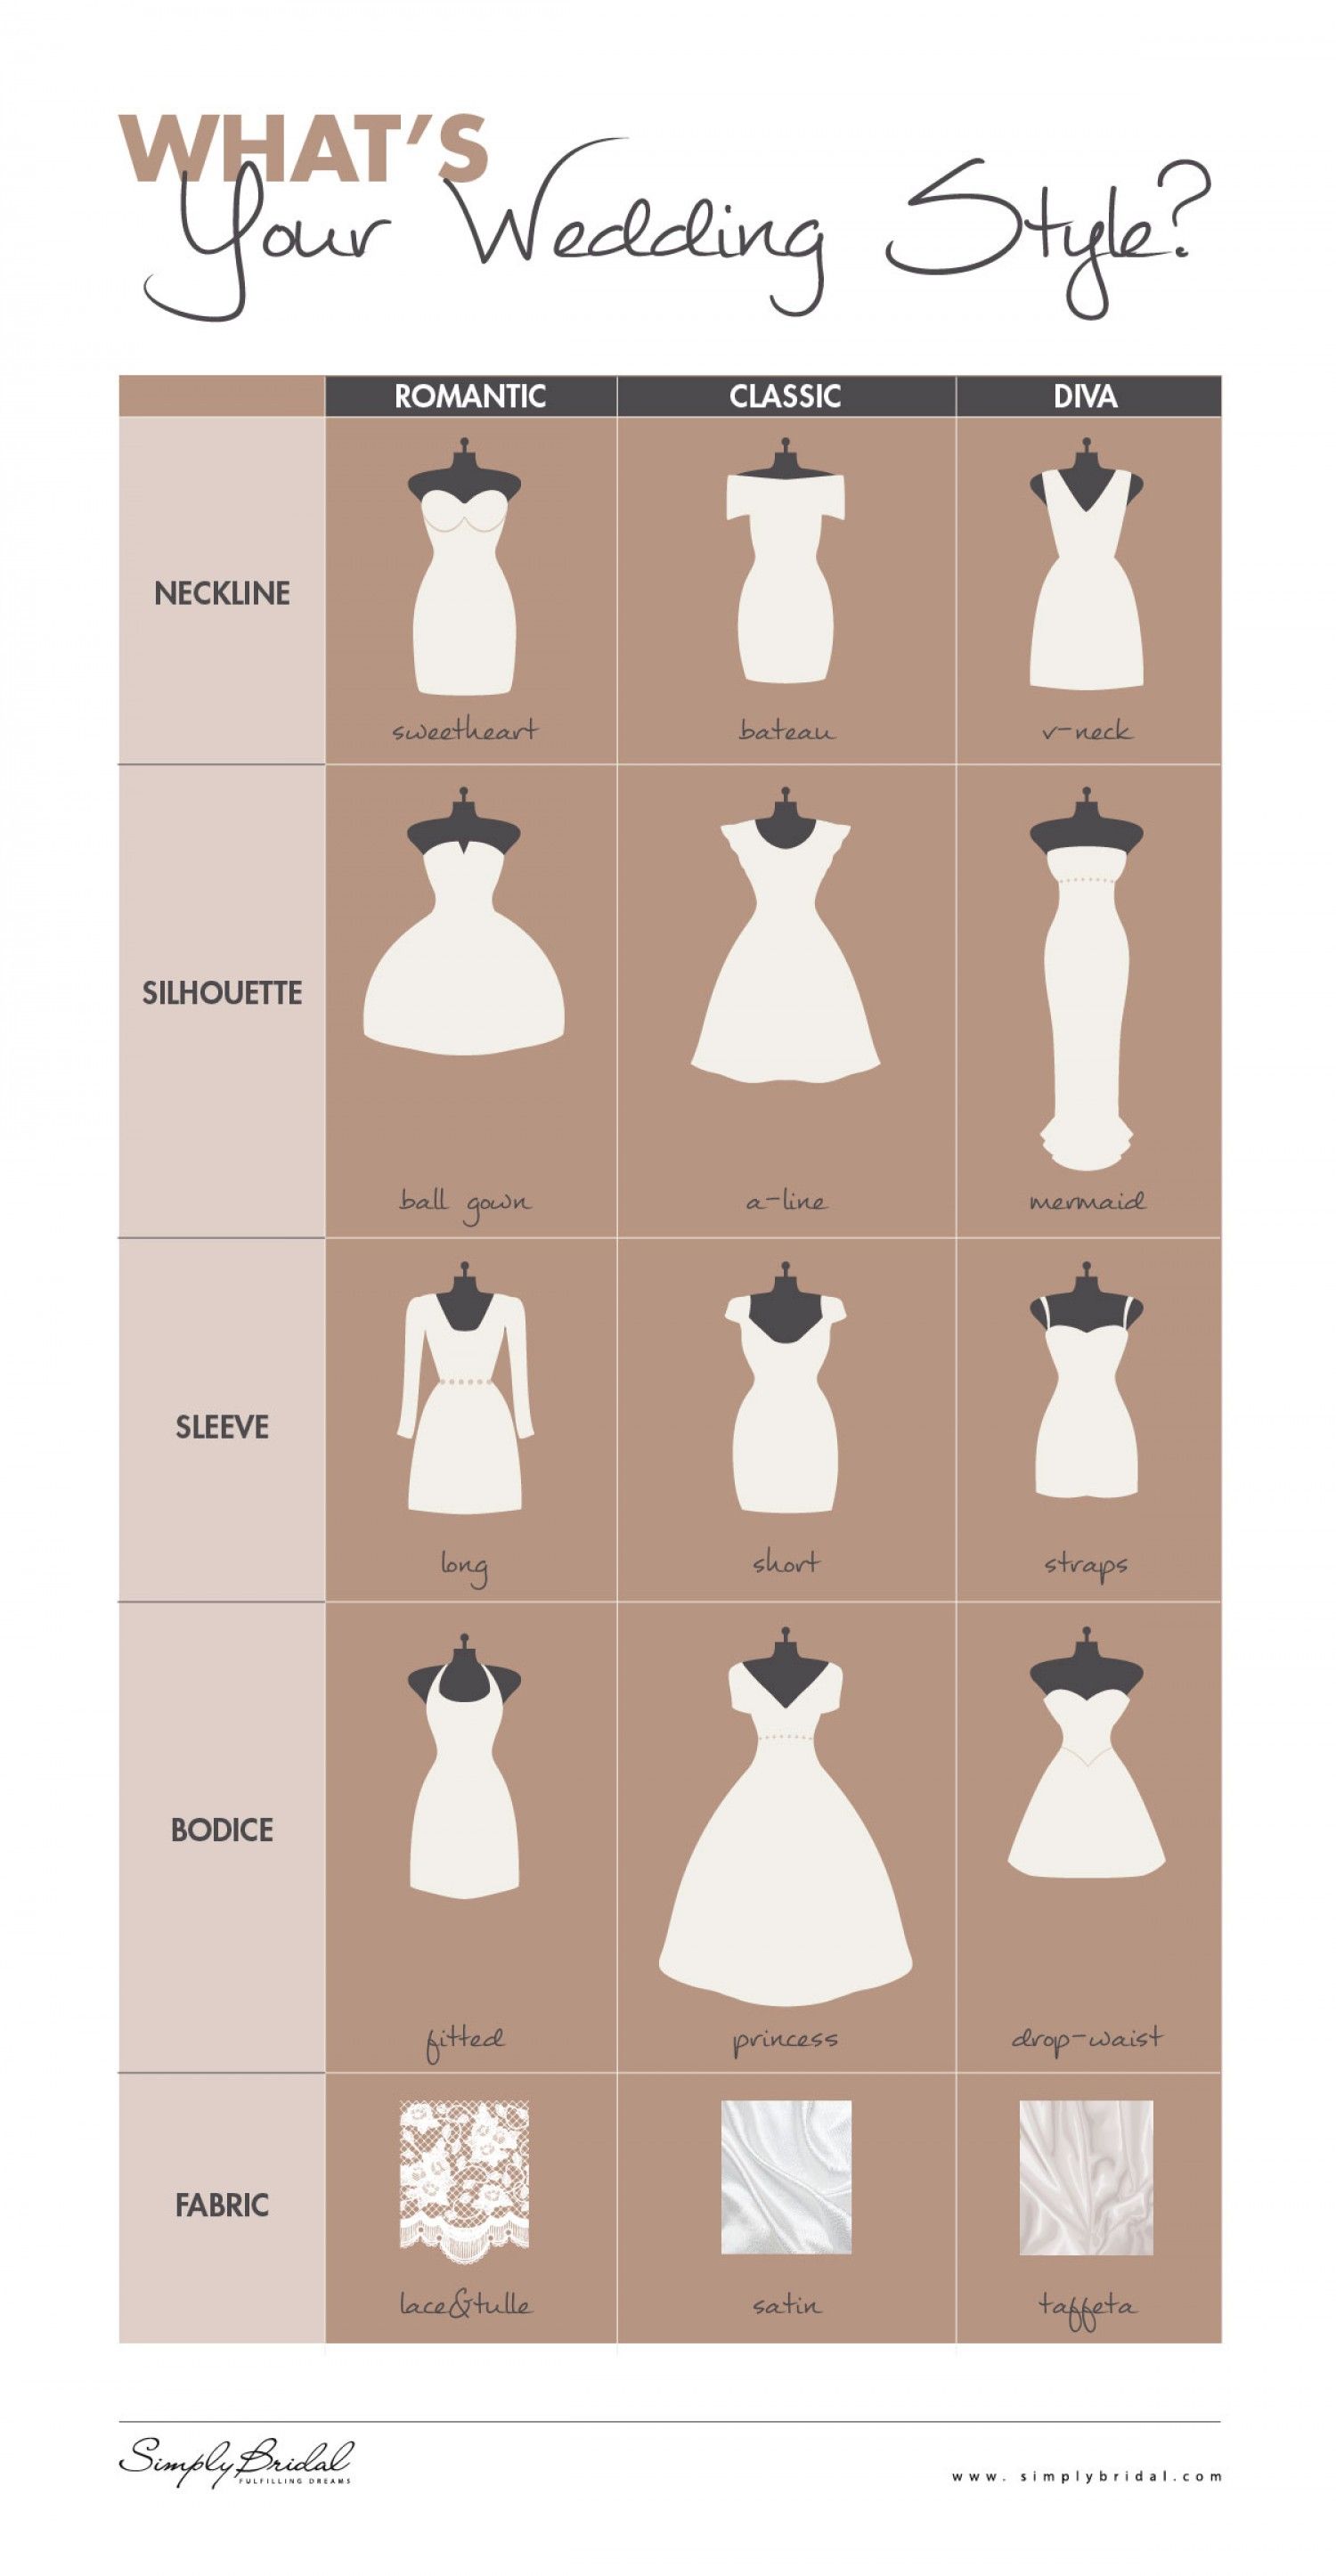 What's Your Wedding Style